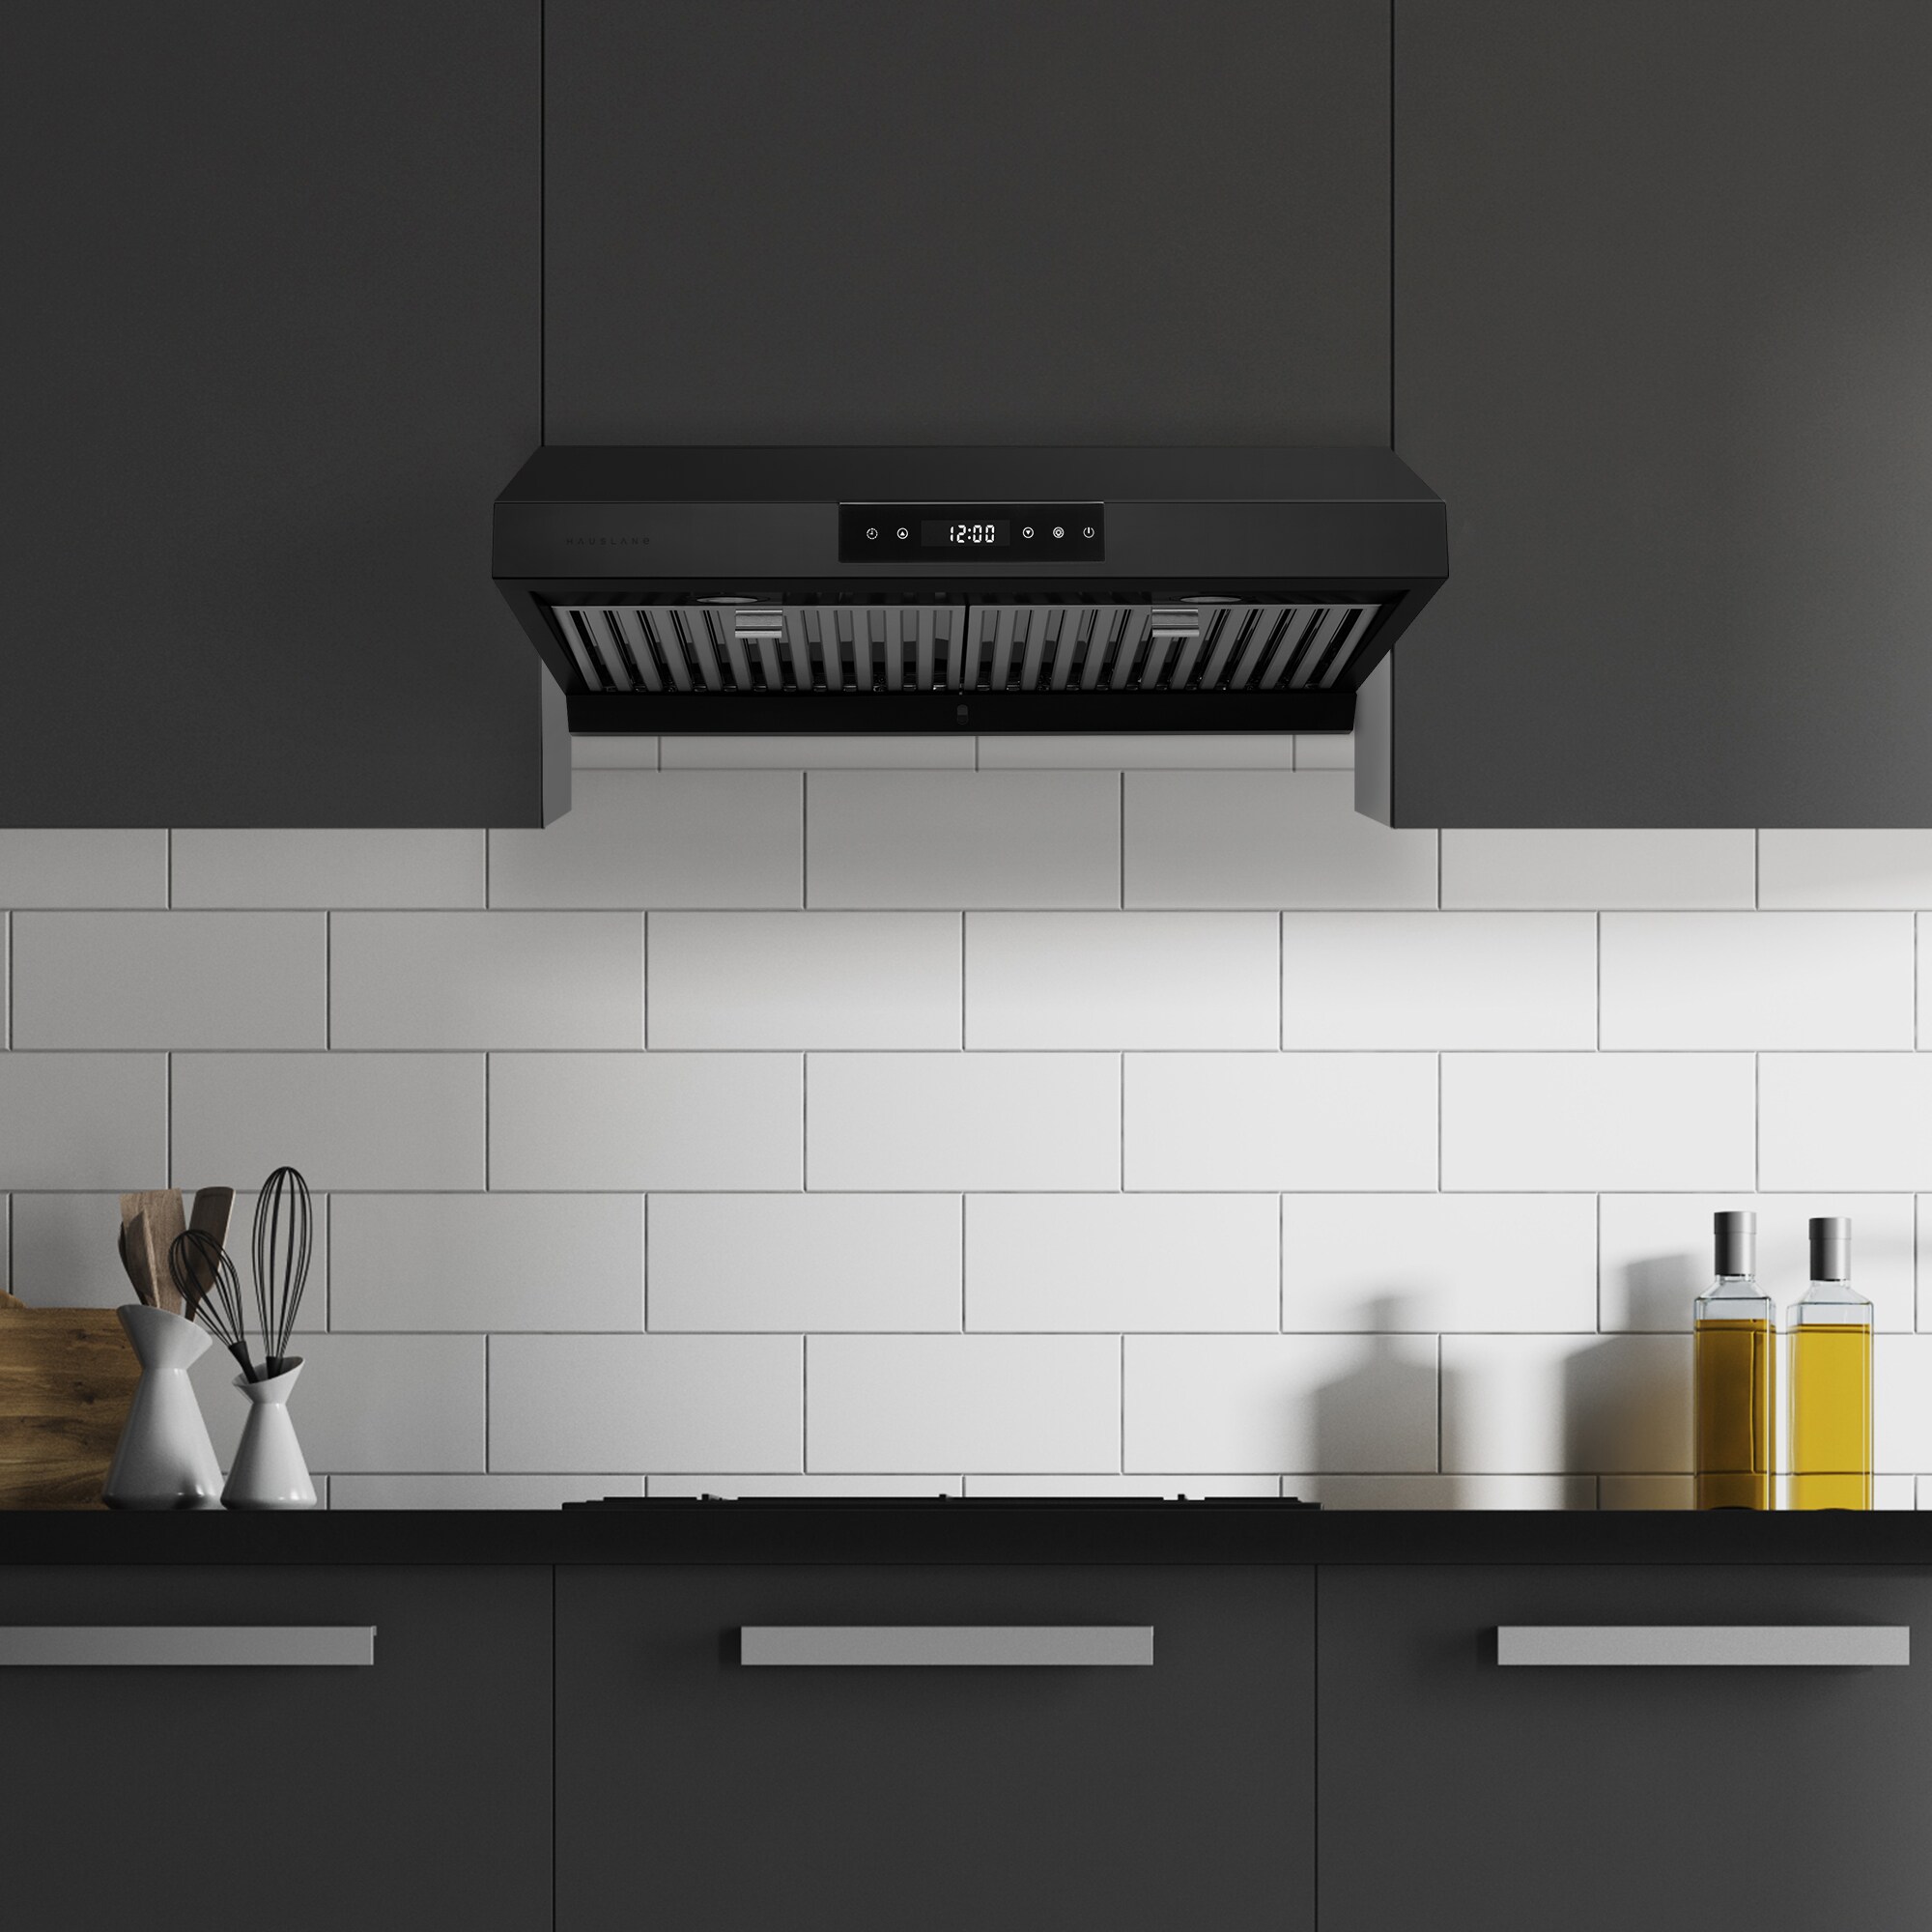 Chef Series 30 PS18 Under Cabinet Range Hood LED Lamps Pro Performance Touch Screen Contemporary Design 860 CFM Matt Black Dishwasher Safe Baffle Filters 3-Way Venting Hauslane